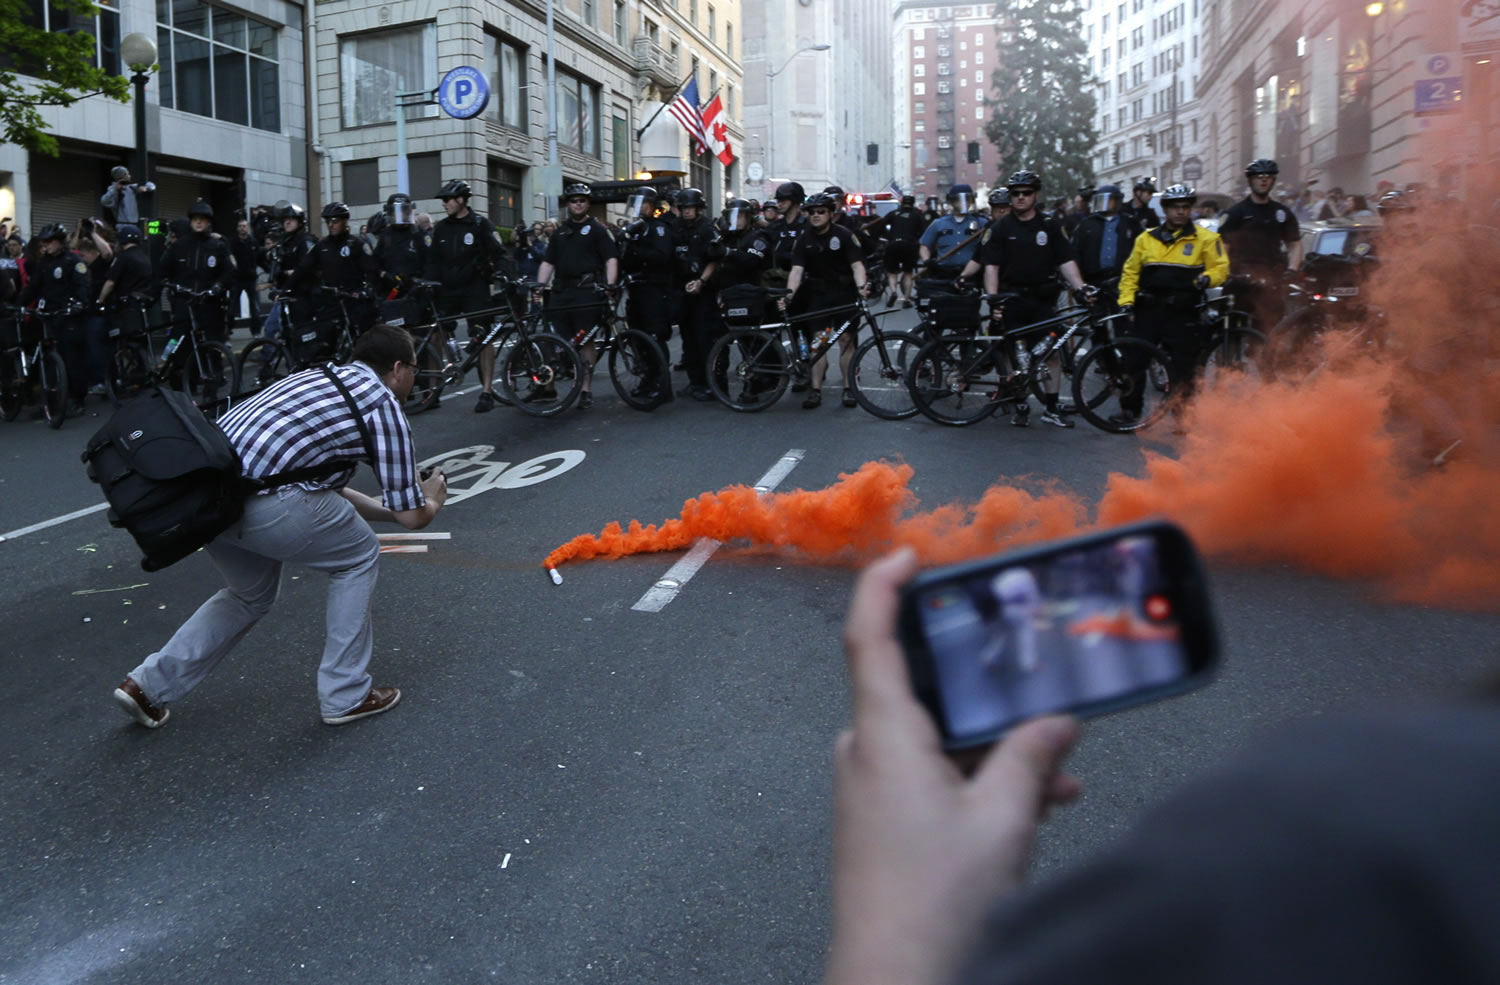 A man uses a mobile phone to photograph a man photographing a smoke device dropped in front of a row of Seattle Police officers during a May Day march that began as an anti-capitalism protest and turned into demonstrators clashing with police Wednesday in downtown Seattle.